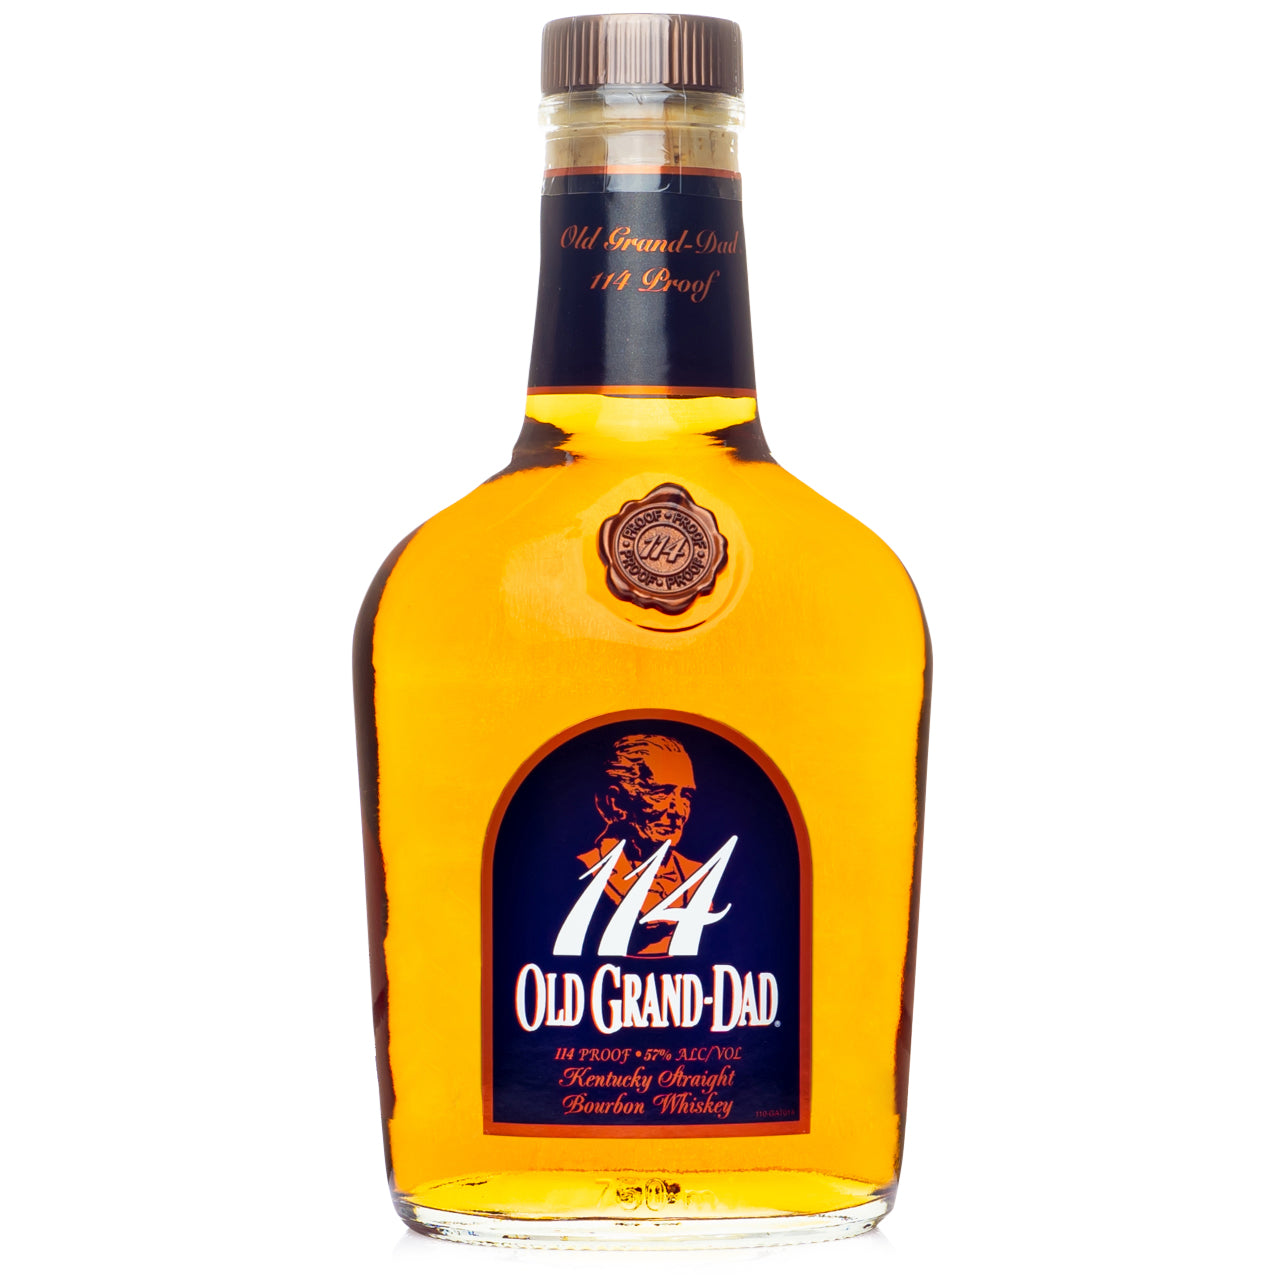 Old Grand Dad 114 Proof Bourbon